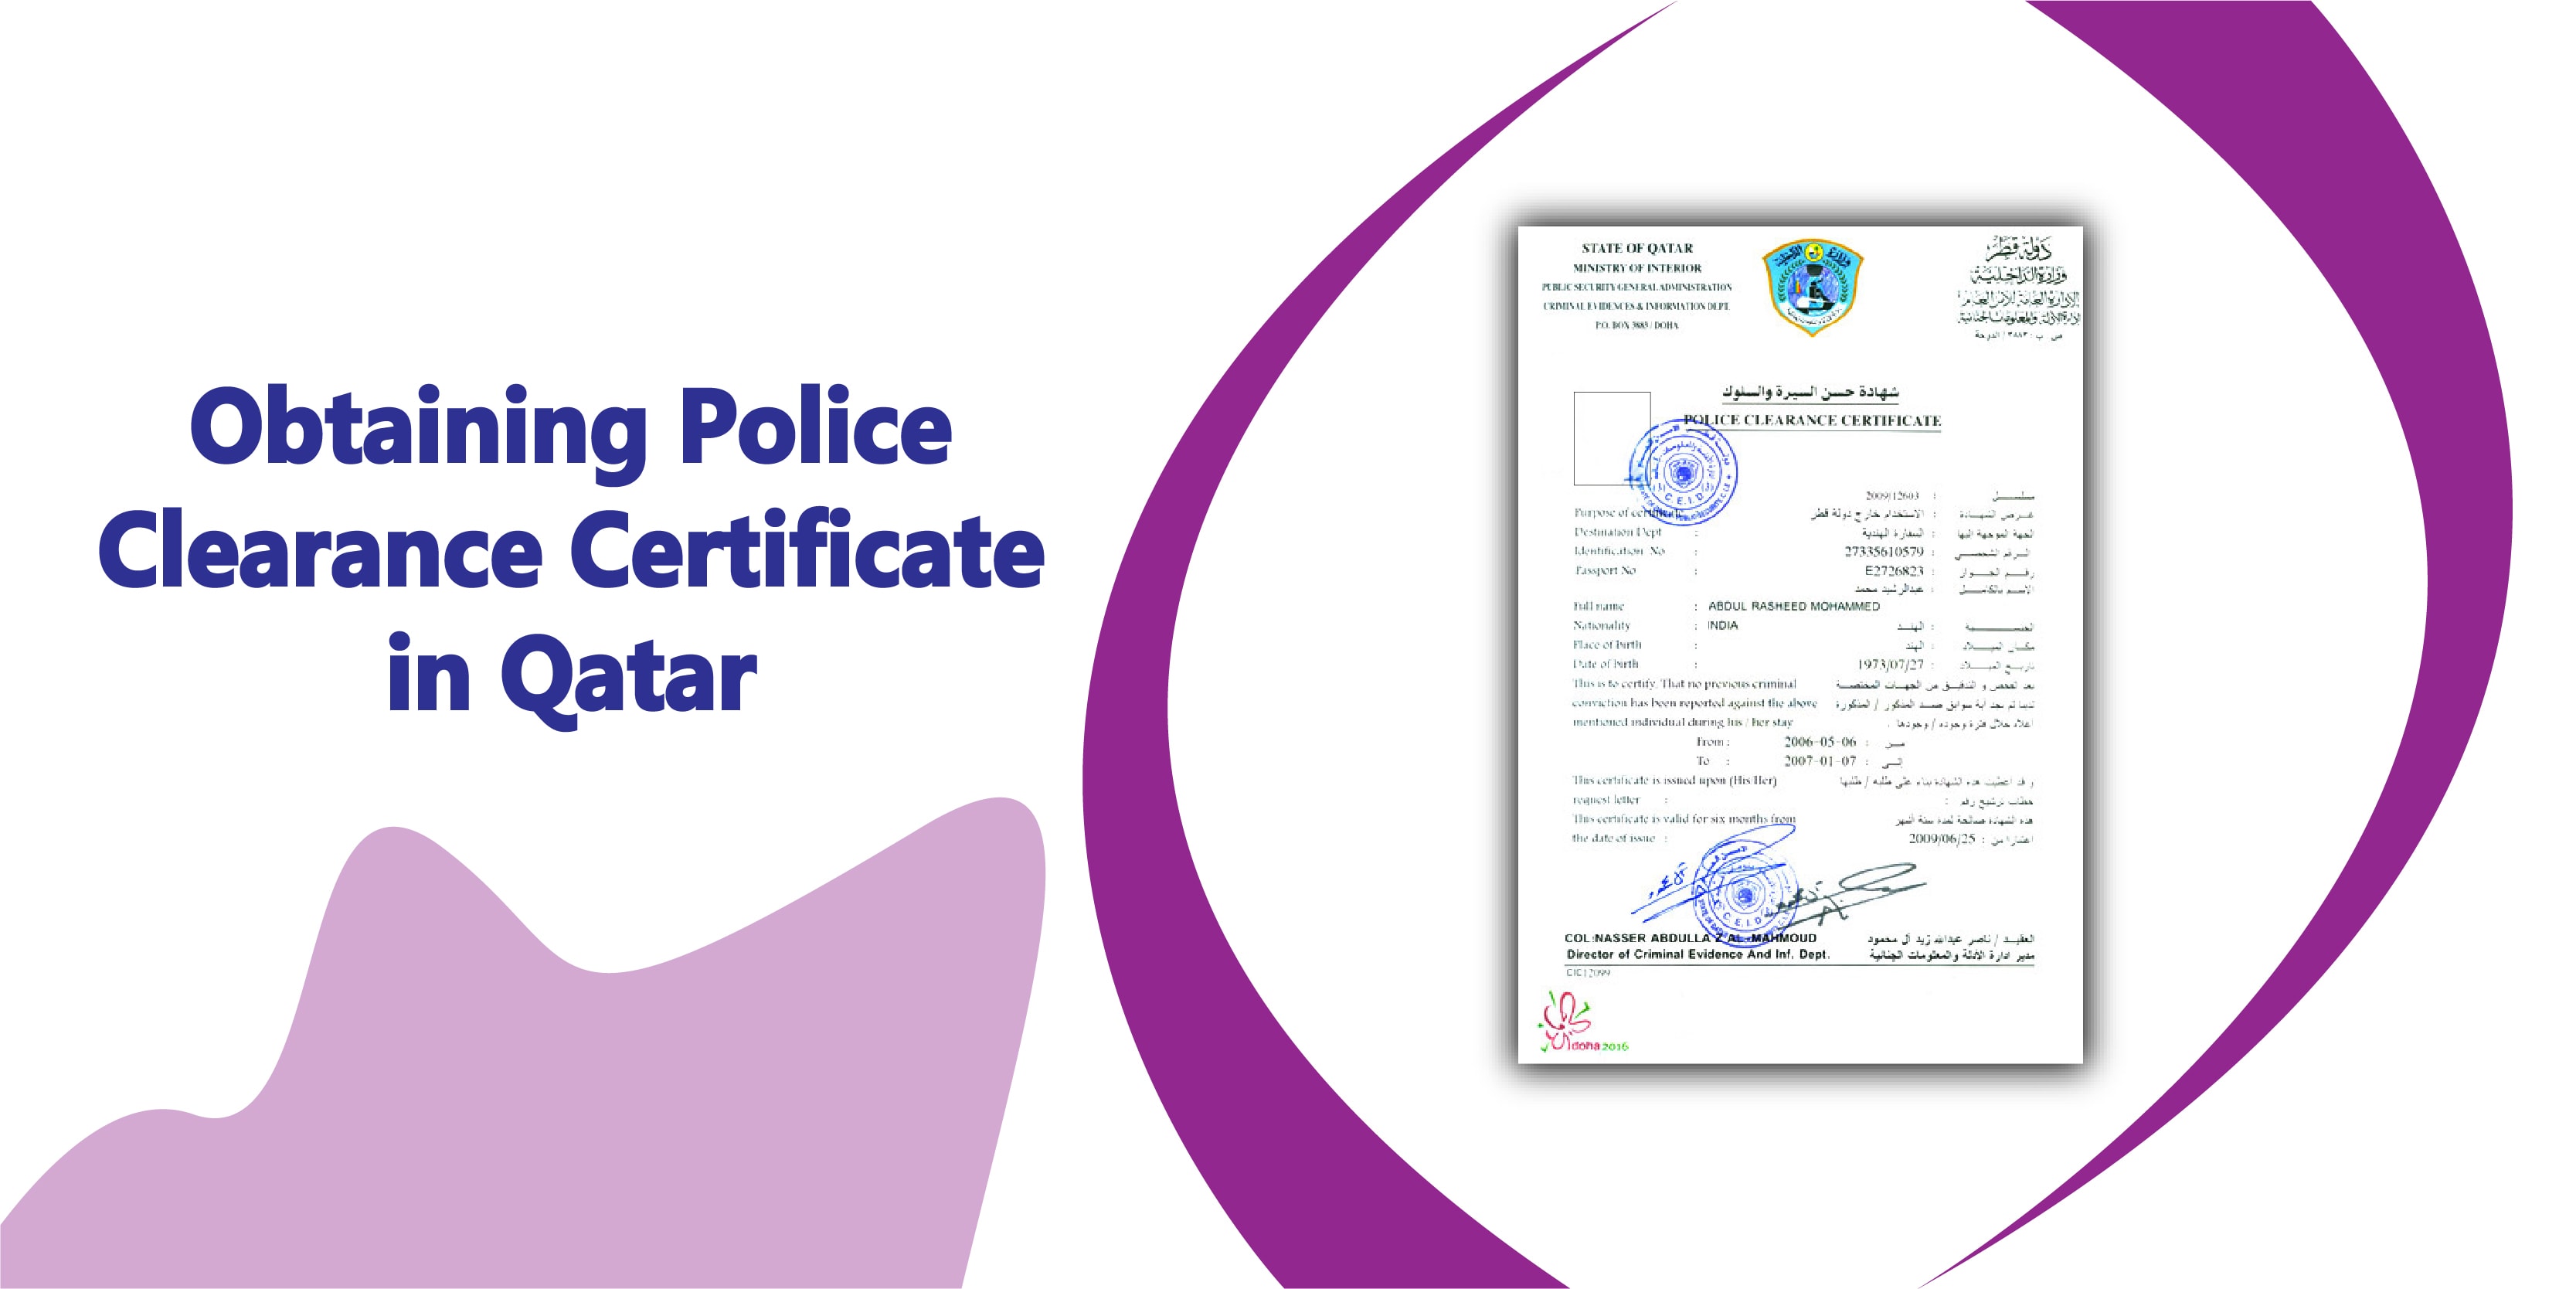 Obtaining Police Clearance Certificate in Qatar